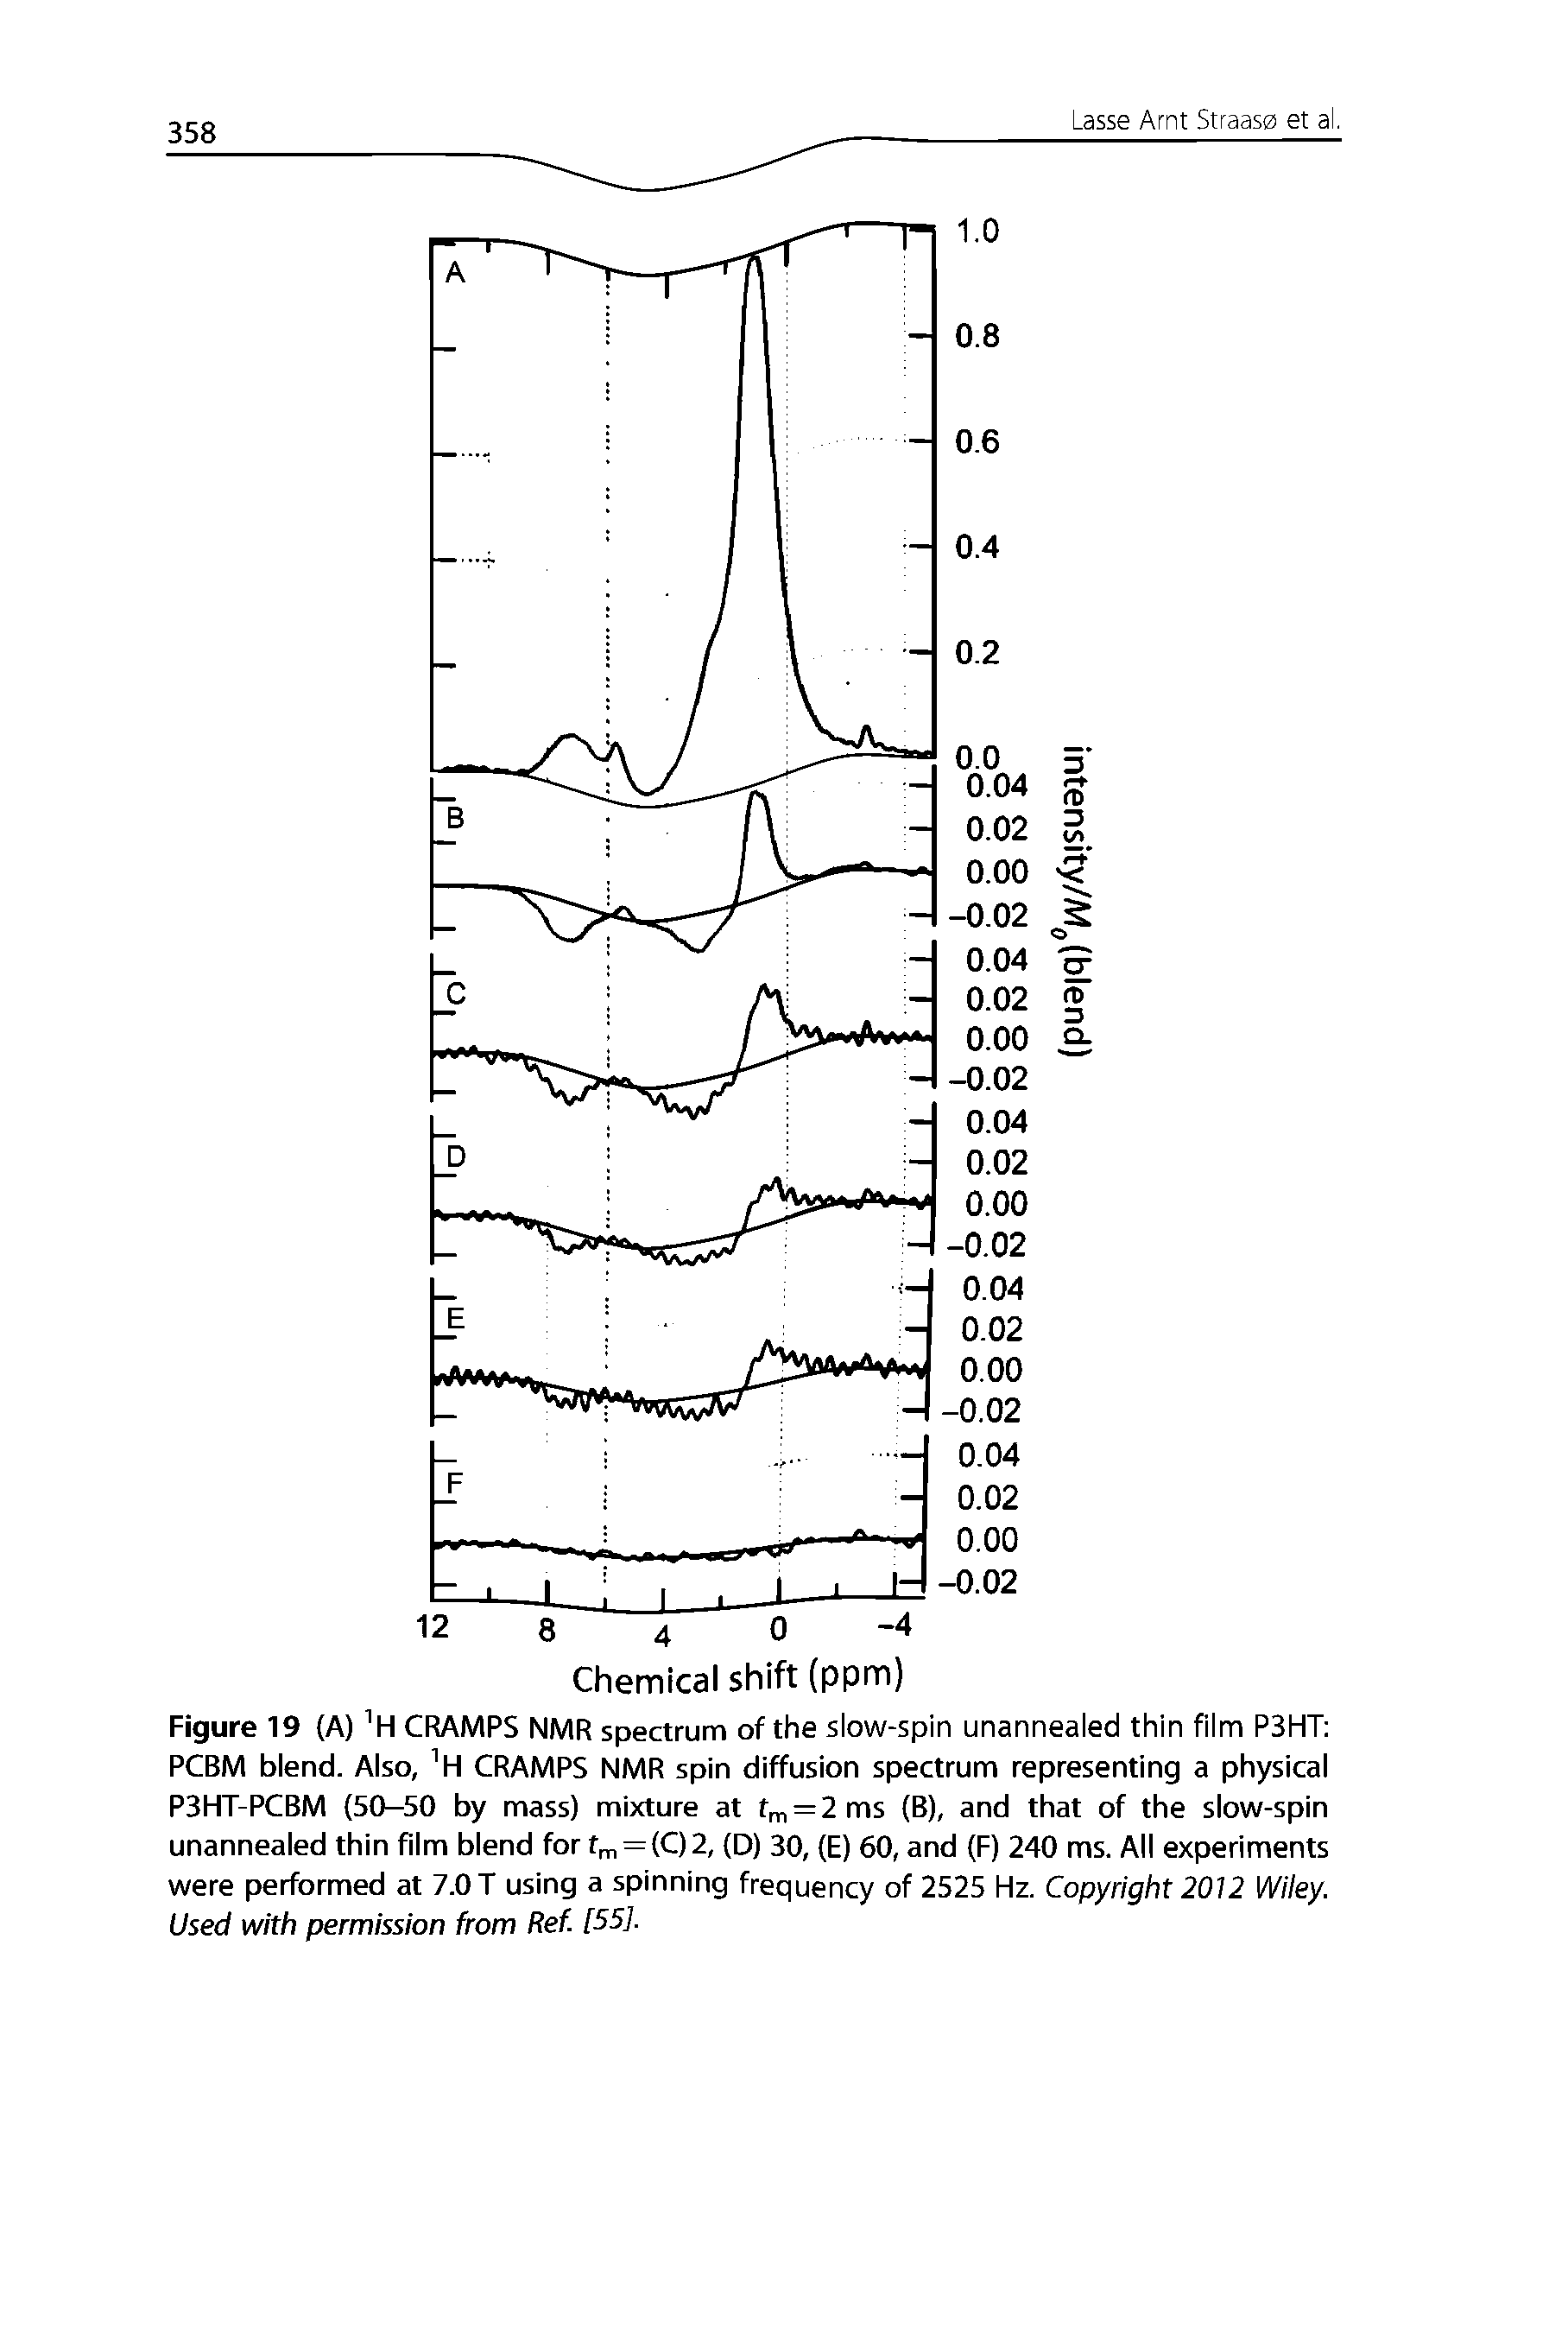 Figure 19 (A) CRAMPS NMR spectrum of the slow-spin unannealed thin film P3HT PCBM blend. Also, CRAMPS NMR spin diffusion spectrum representing a physical P3HT-PCBM (50-50 by mass) mixture at tm = 2 ms (B), and that of the slow-spin unannealed thin film blend for f,n=(C)2, (D) 30, (E) 60, and (F) 240 ms. All experiments were performed at 7.0 T using a spinning frequency of 2525 Hz. Copyright 2012 Wiley. Used with permission from Ref. [55].